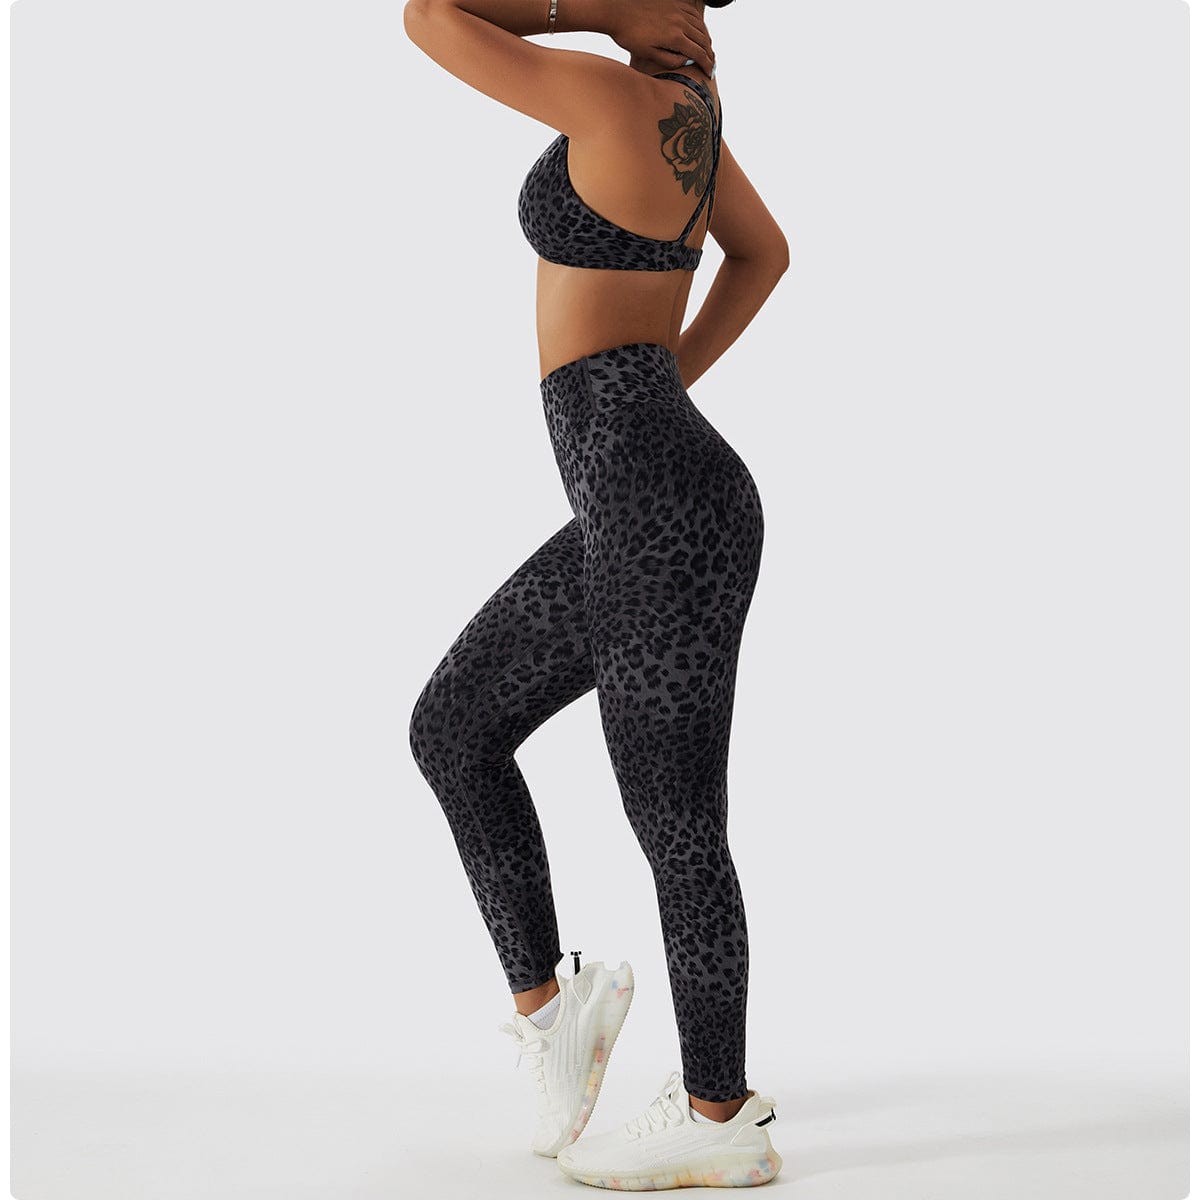 Leopard Print Active Yoga Set For Women 2023 Gym Wear Sets Women For  Fitness, Workout, And Sportswear Gilding Sport Outfit With Tracksuit In  Black, White, Or XL From Jemimary, $22.91